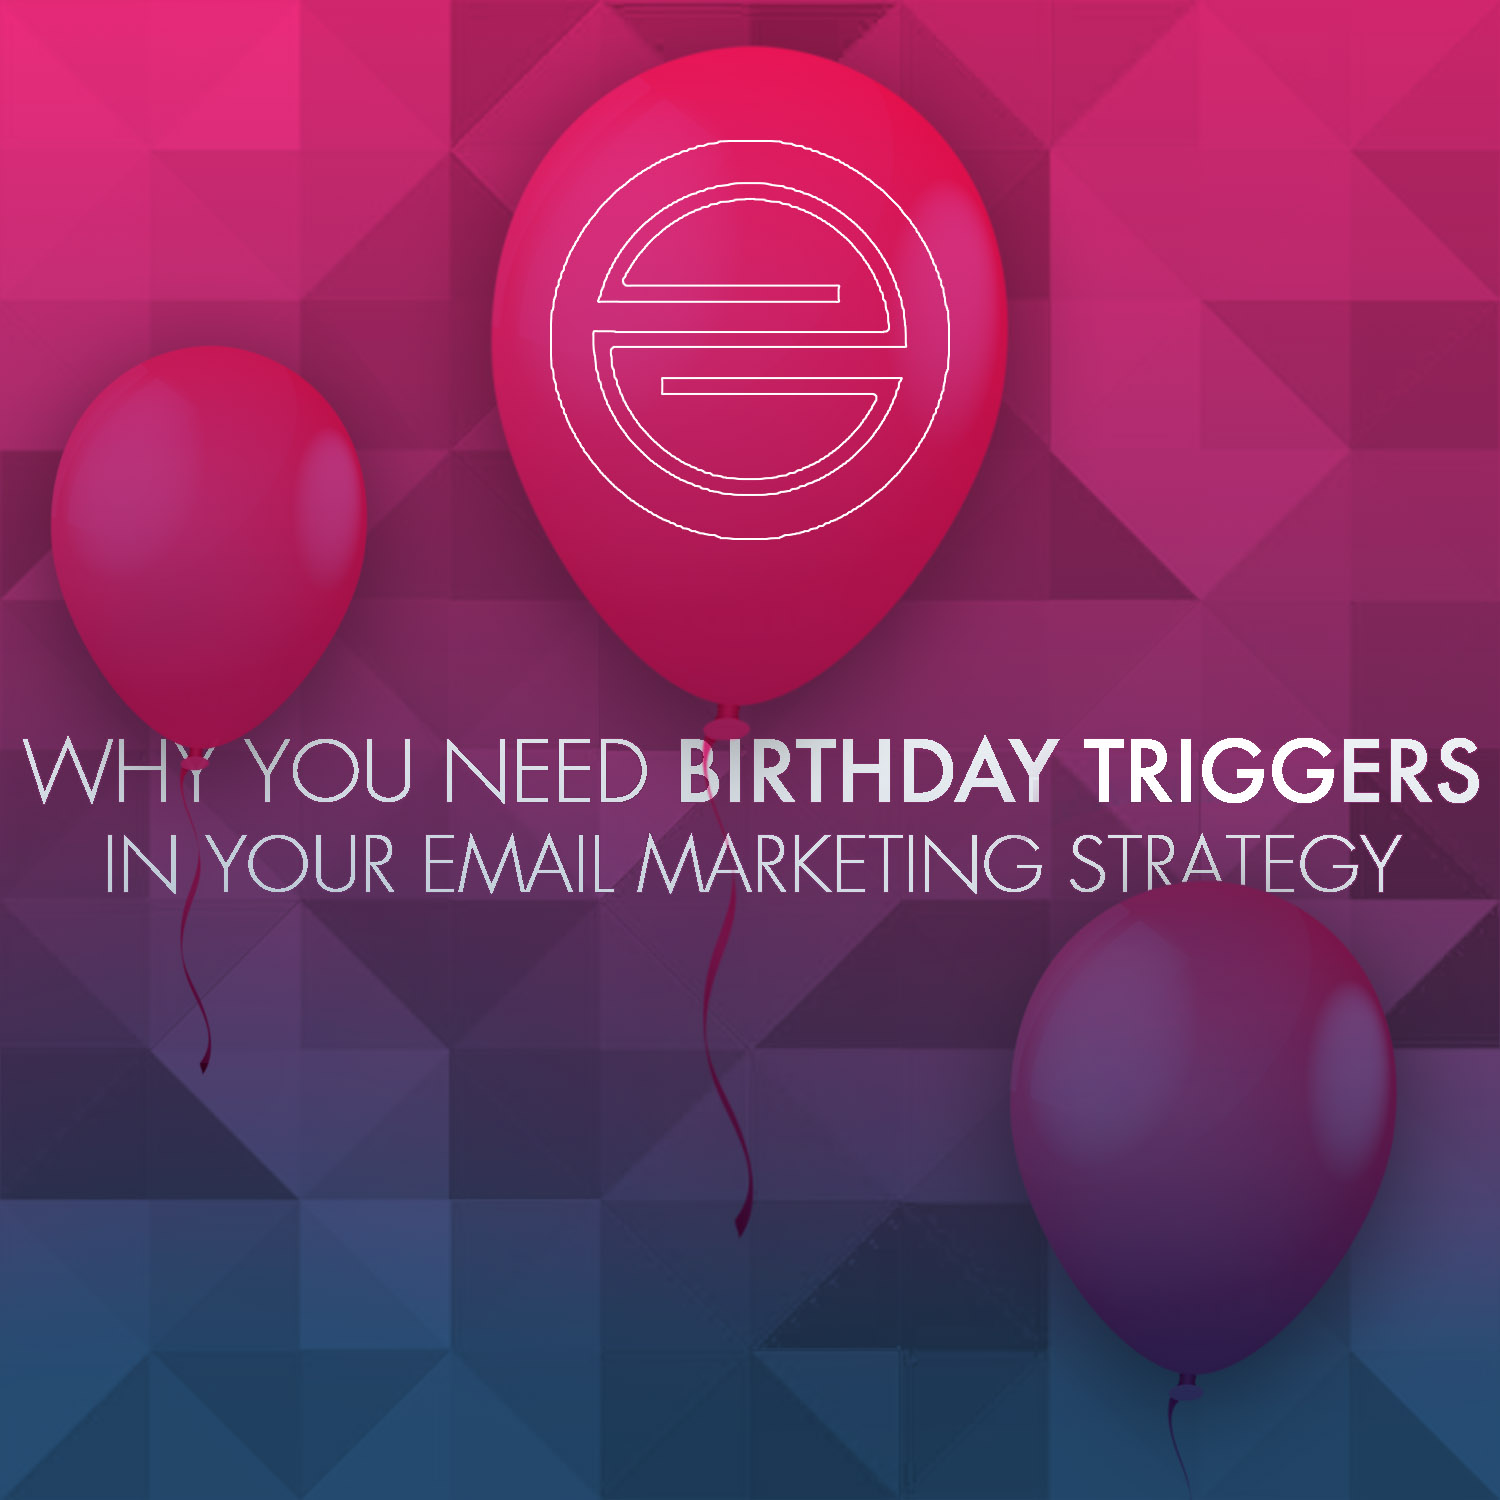 Birthday Triggers in your email marketing by Elysium MG